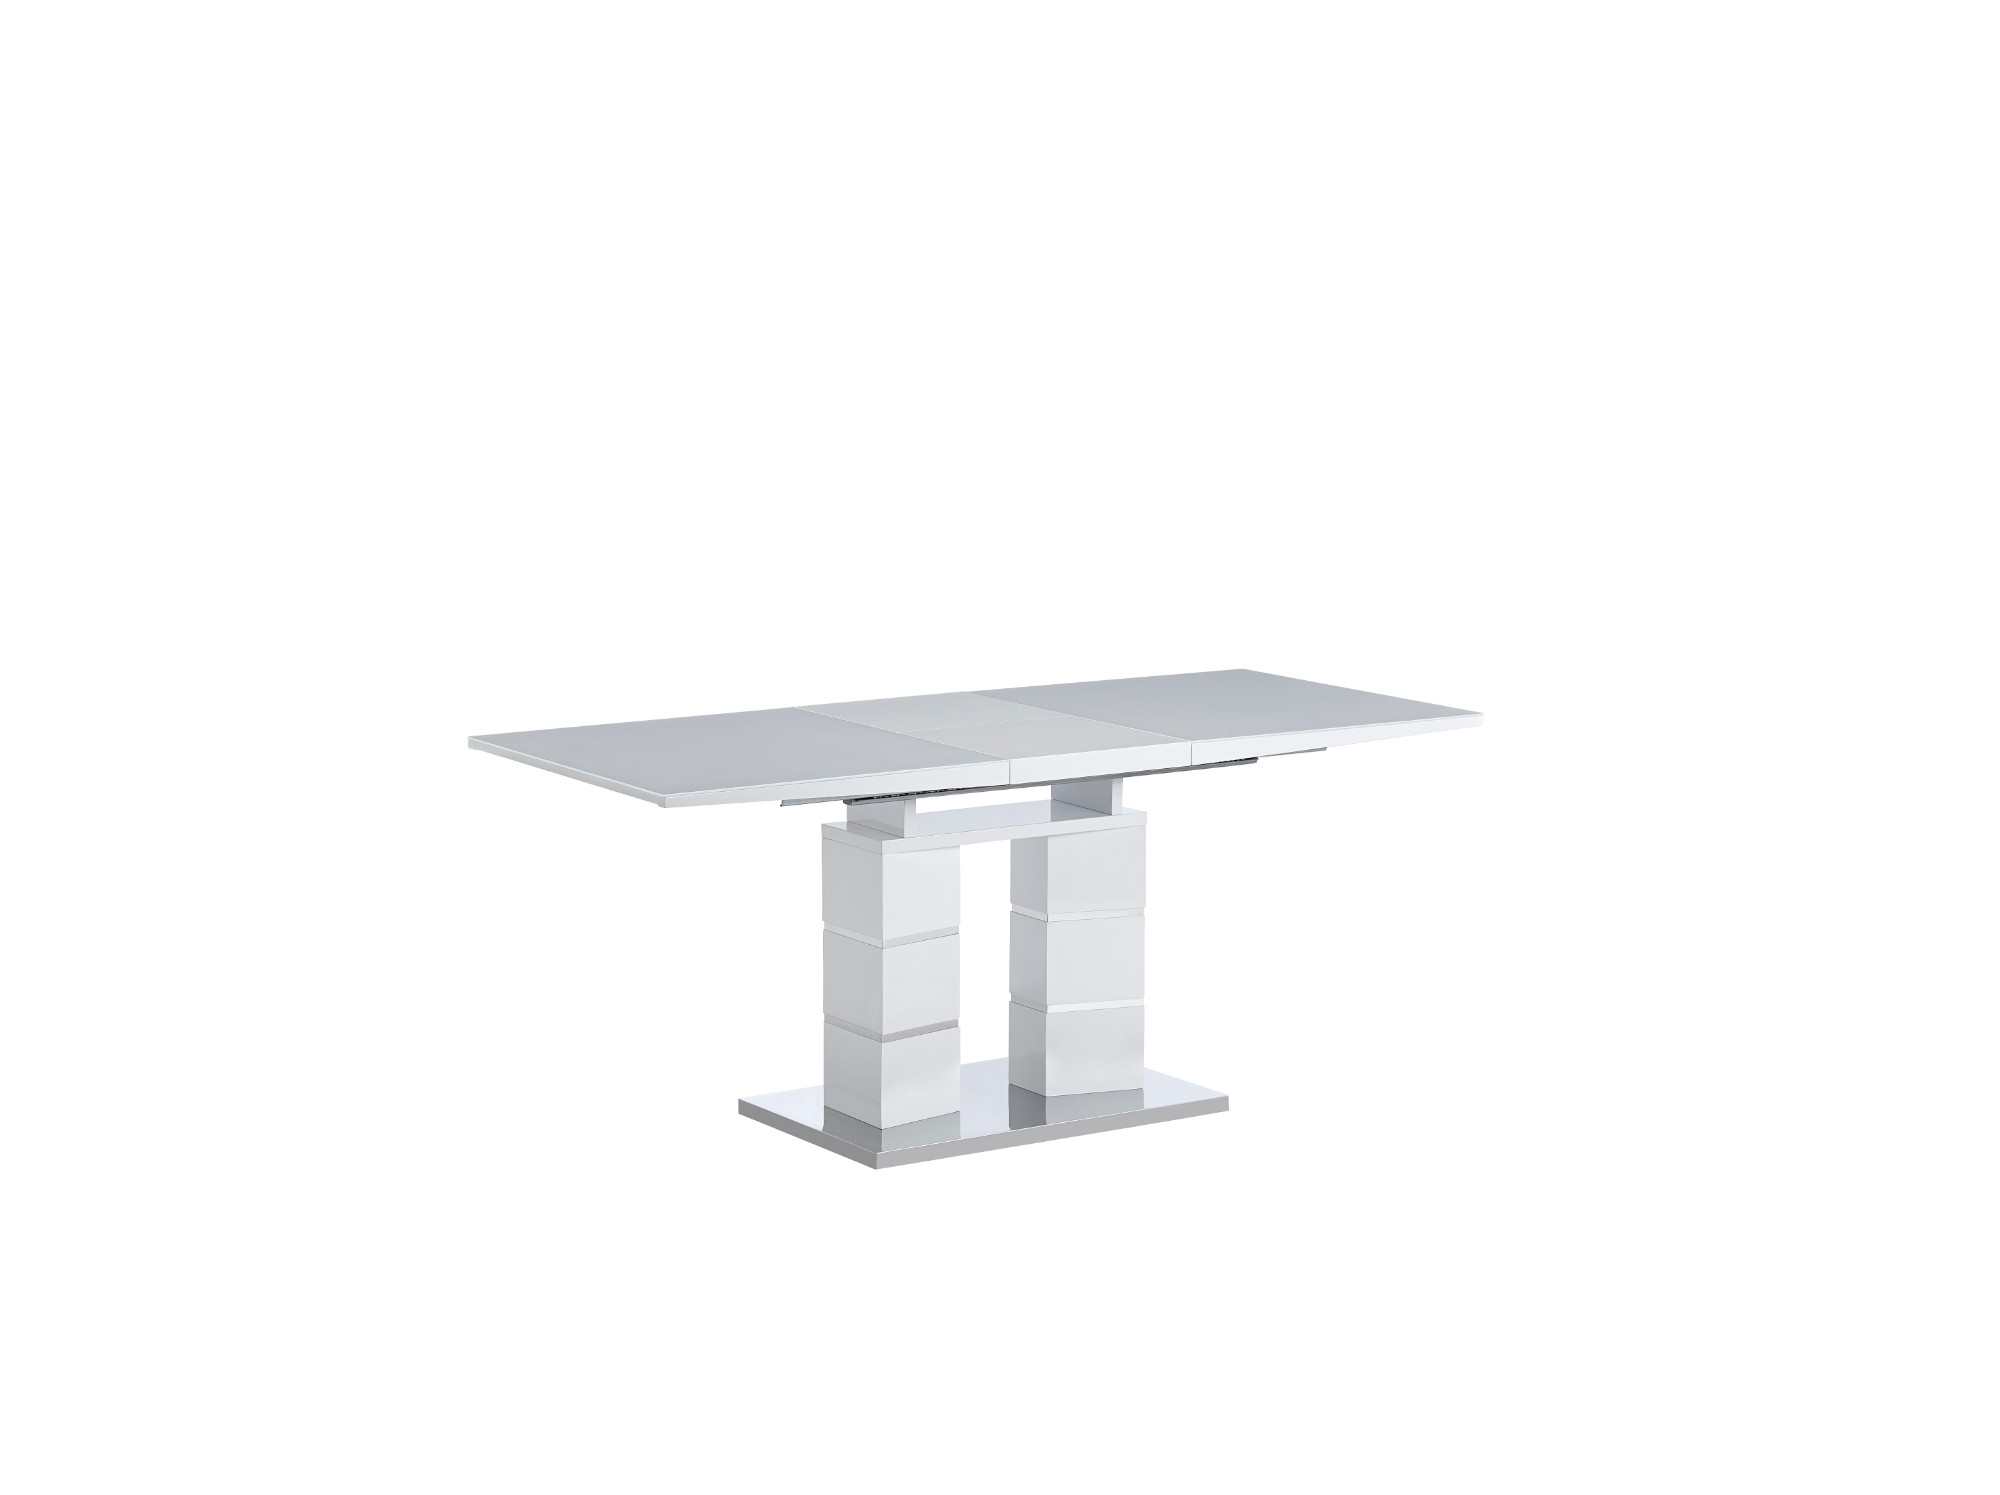 DT-9152G Italian Modern MDF Butterfly Extension High Gloss Table